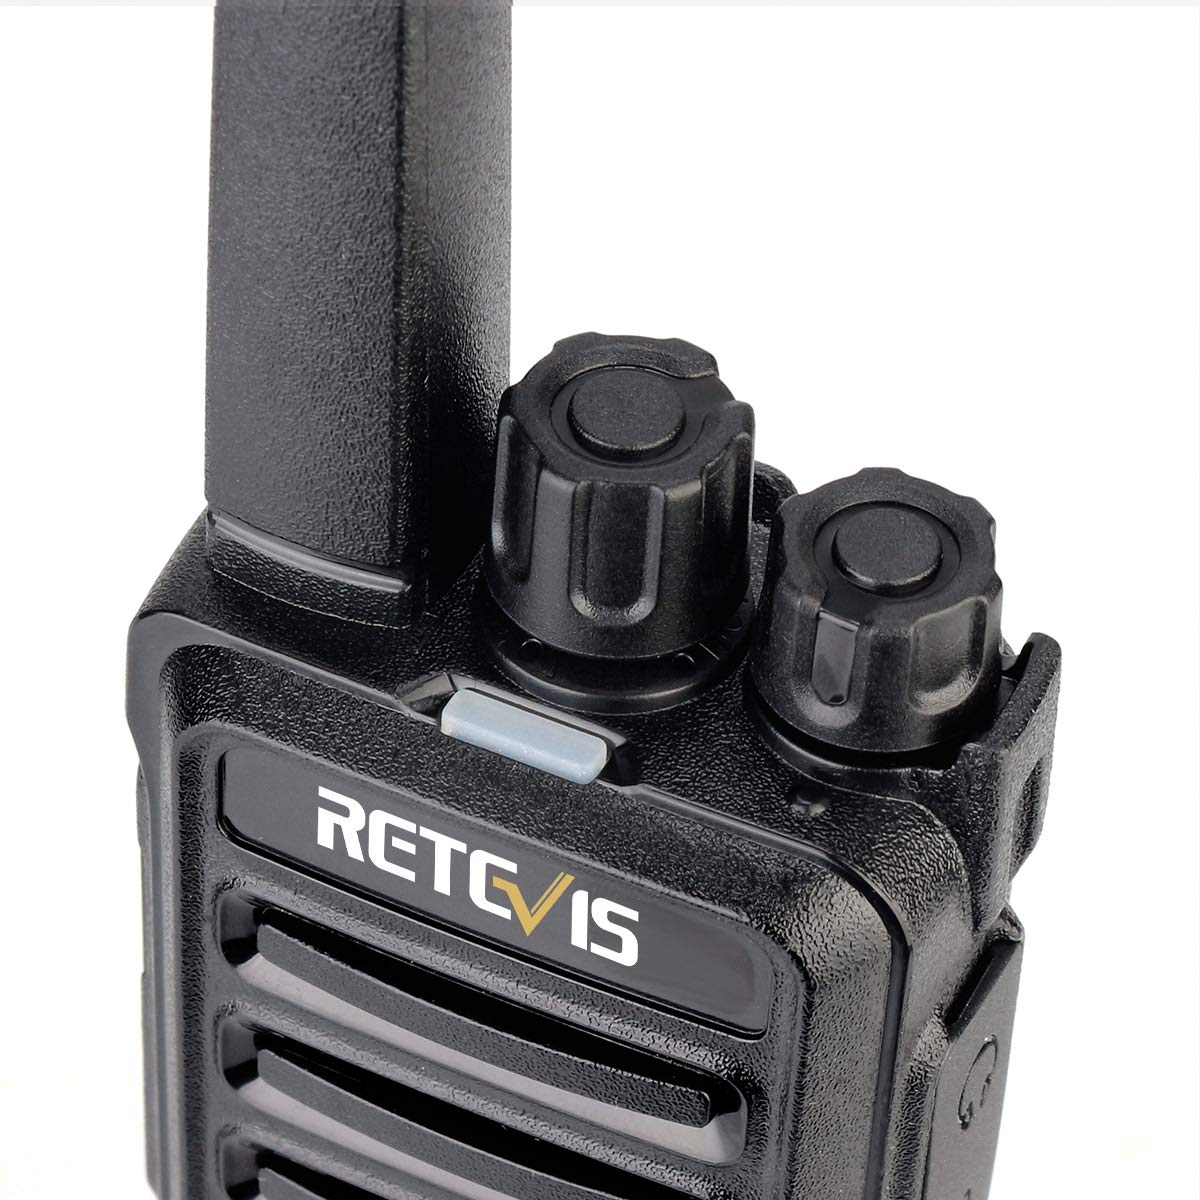 Retevis RT68 Walkie Talkies with Earpiece,2 Way Radios Long Range,Heavy Duty Walkie Talkies for Adults,Rechargeable with USB Charger Base, for Restaurant School Manufacturing Healthcare(20 Pack)